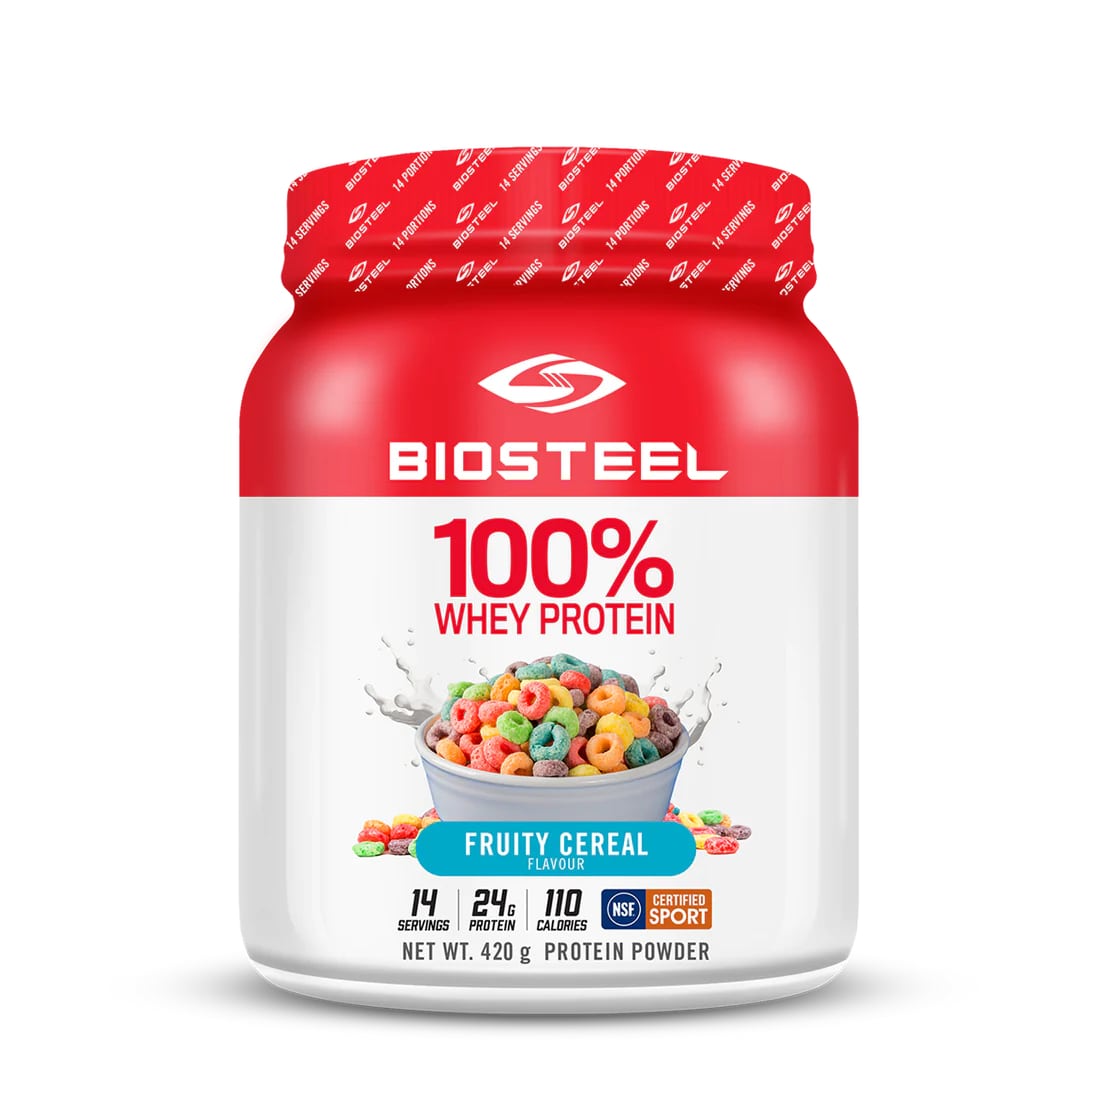 BioSteel 100% Whey Protein (14 Servings) Fruity Cereal